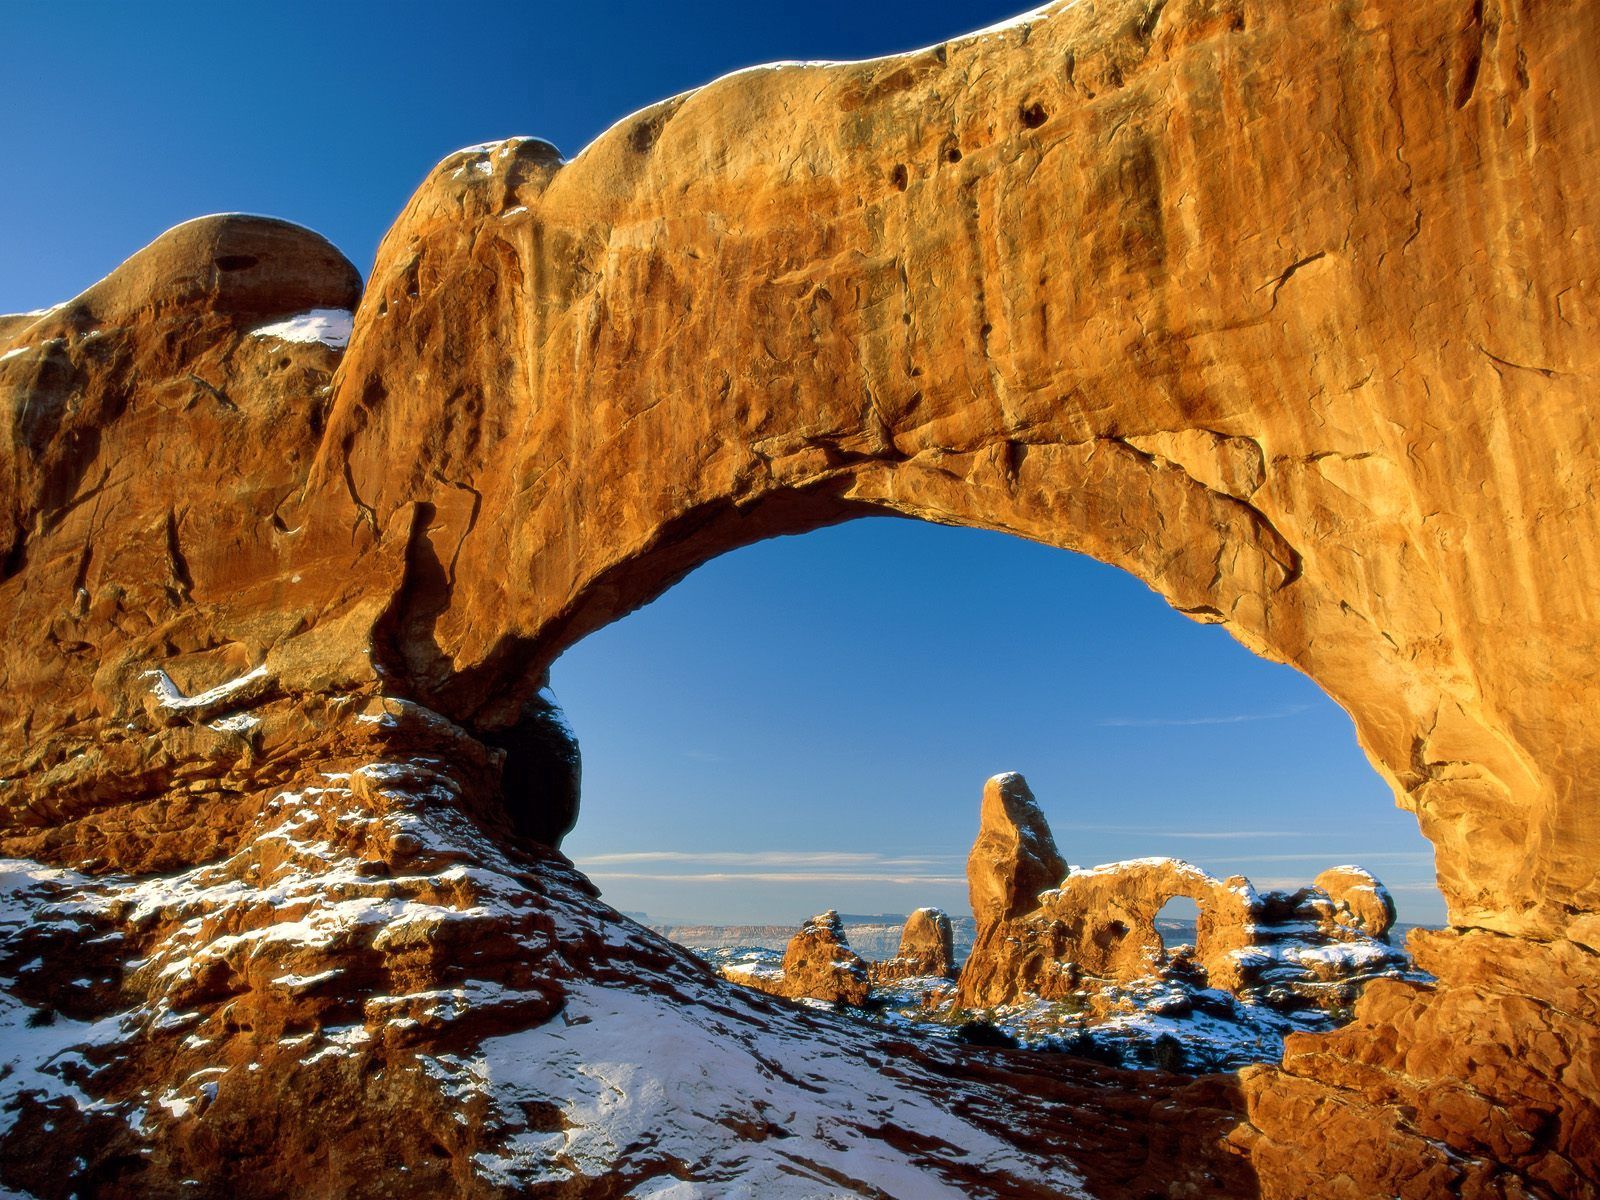 Arches snowy High Arched